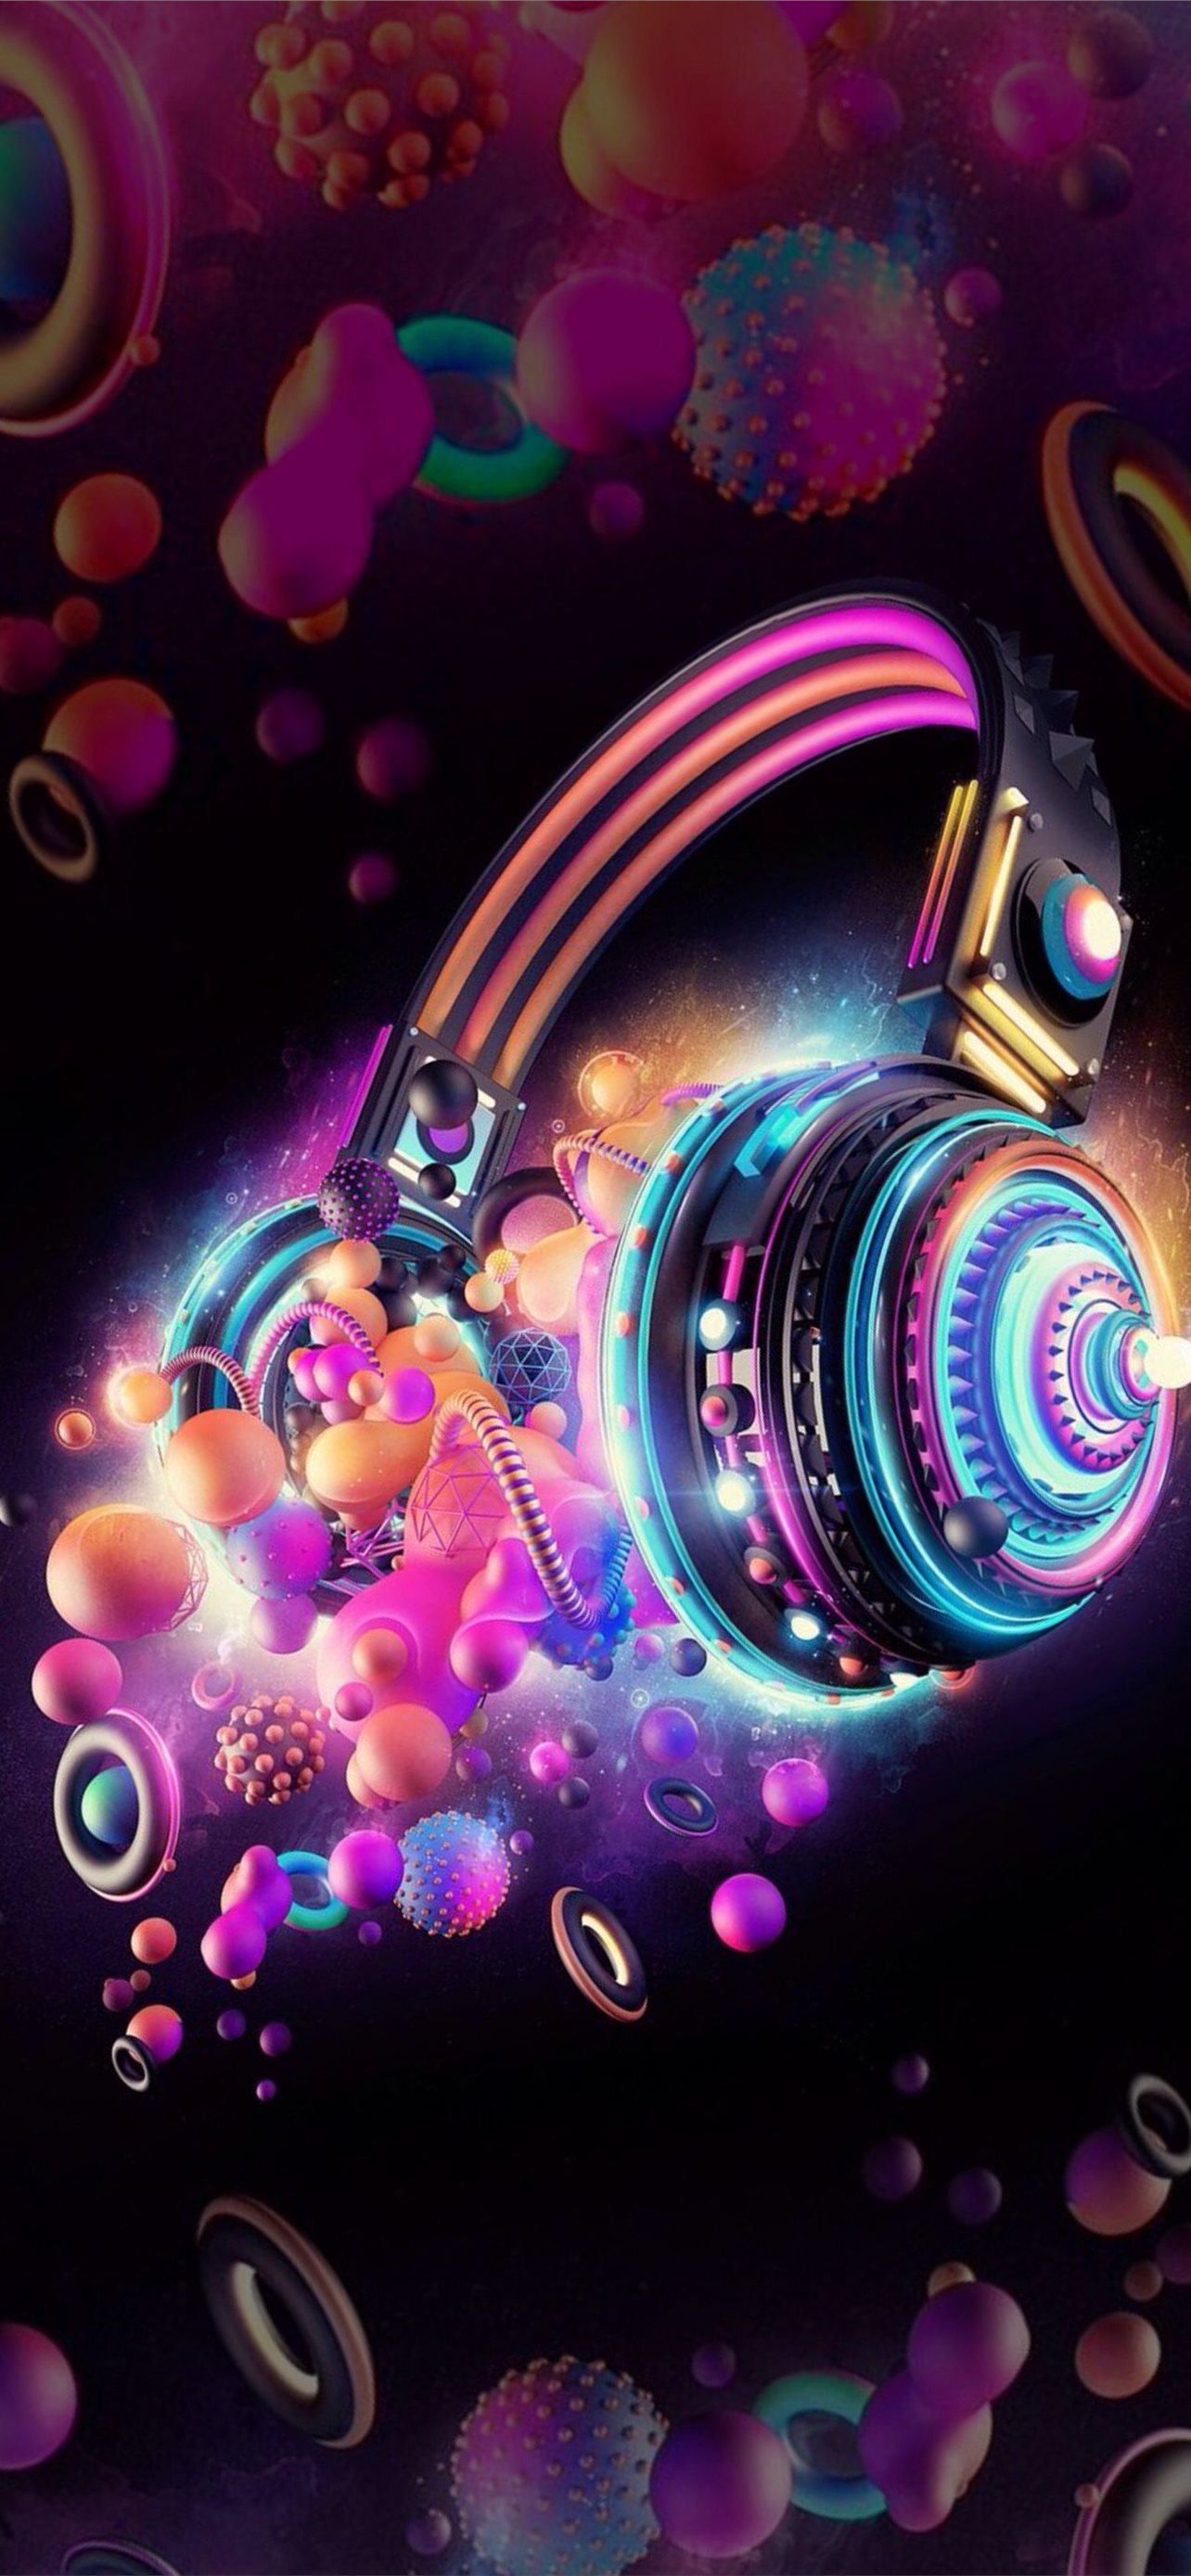 Music Background, Photos, and Wallpaper for Free Download